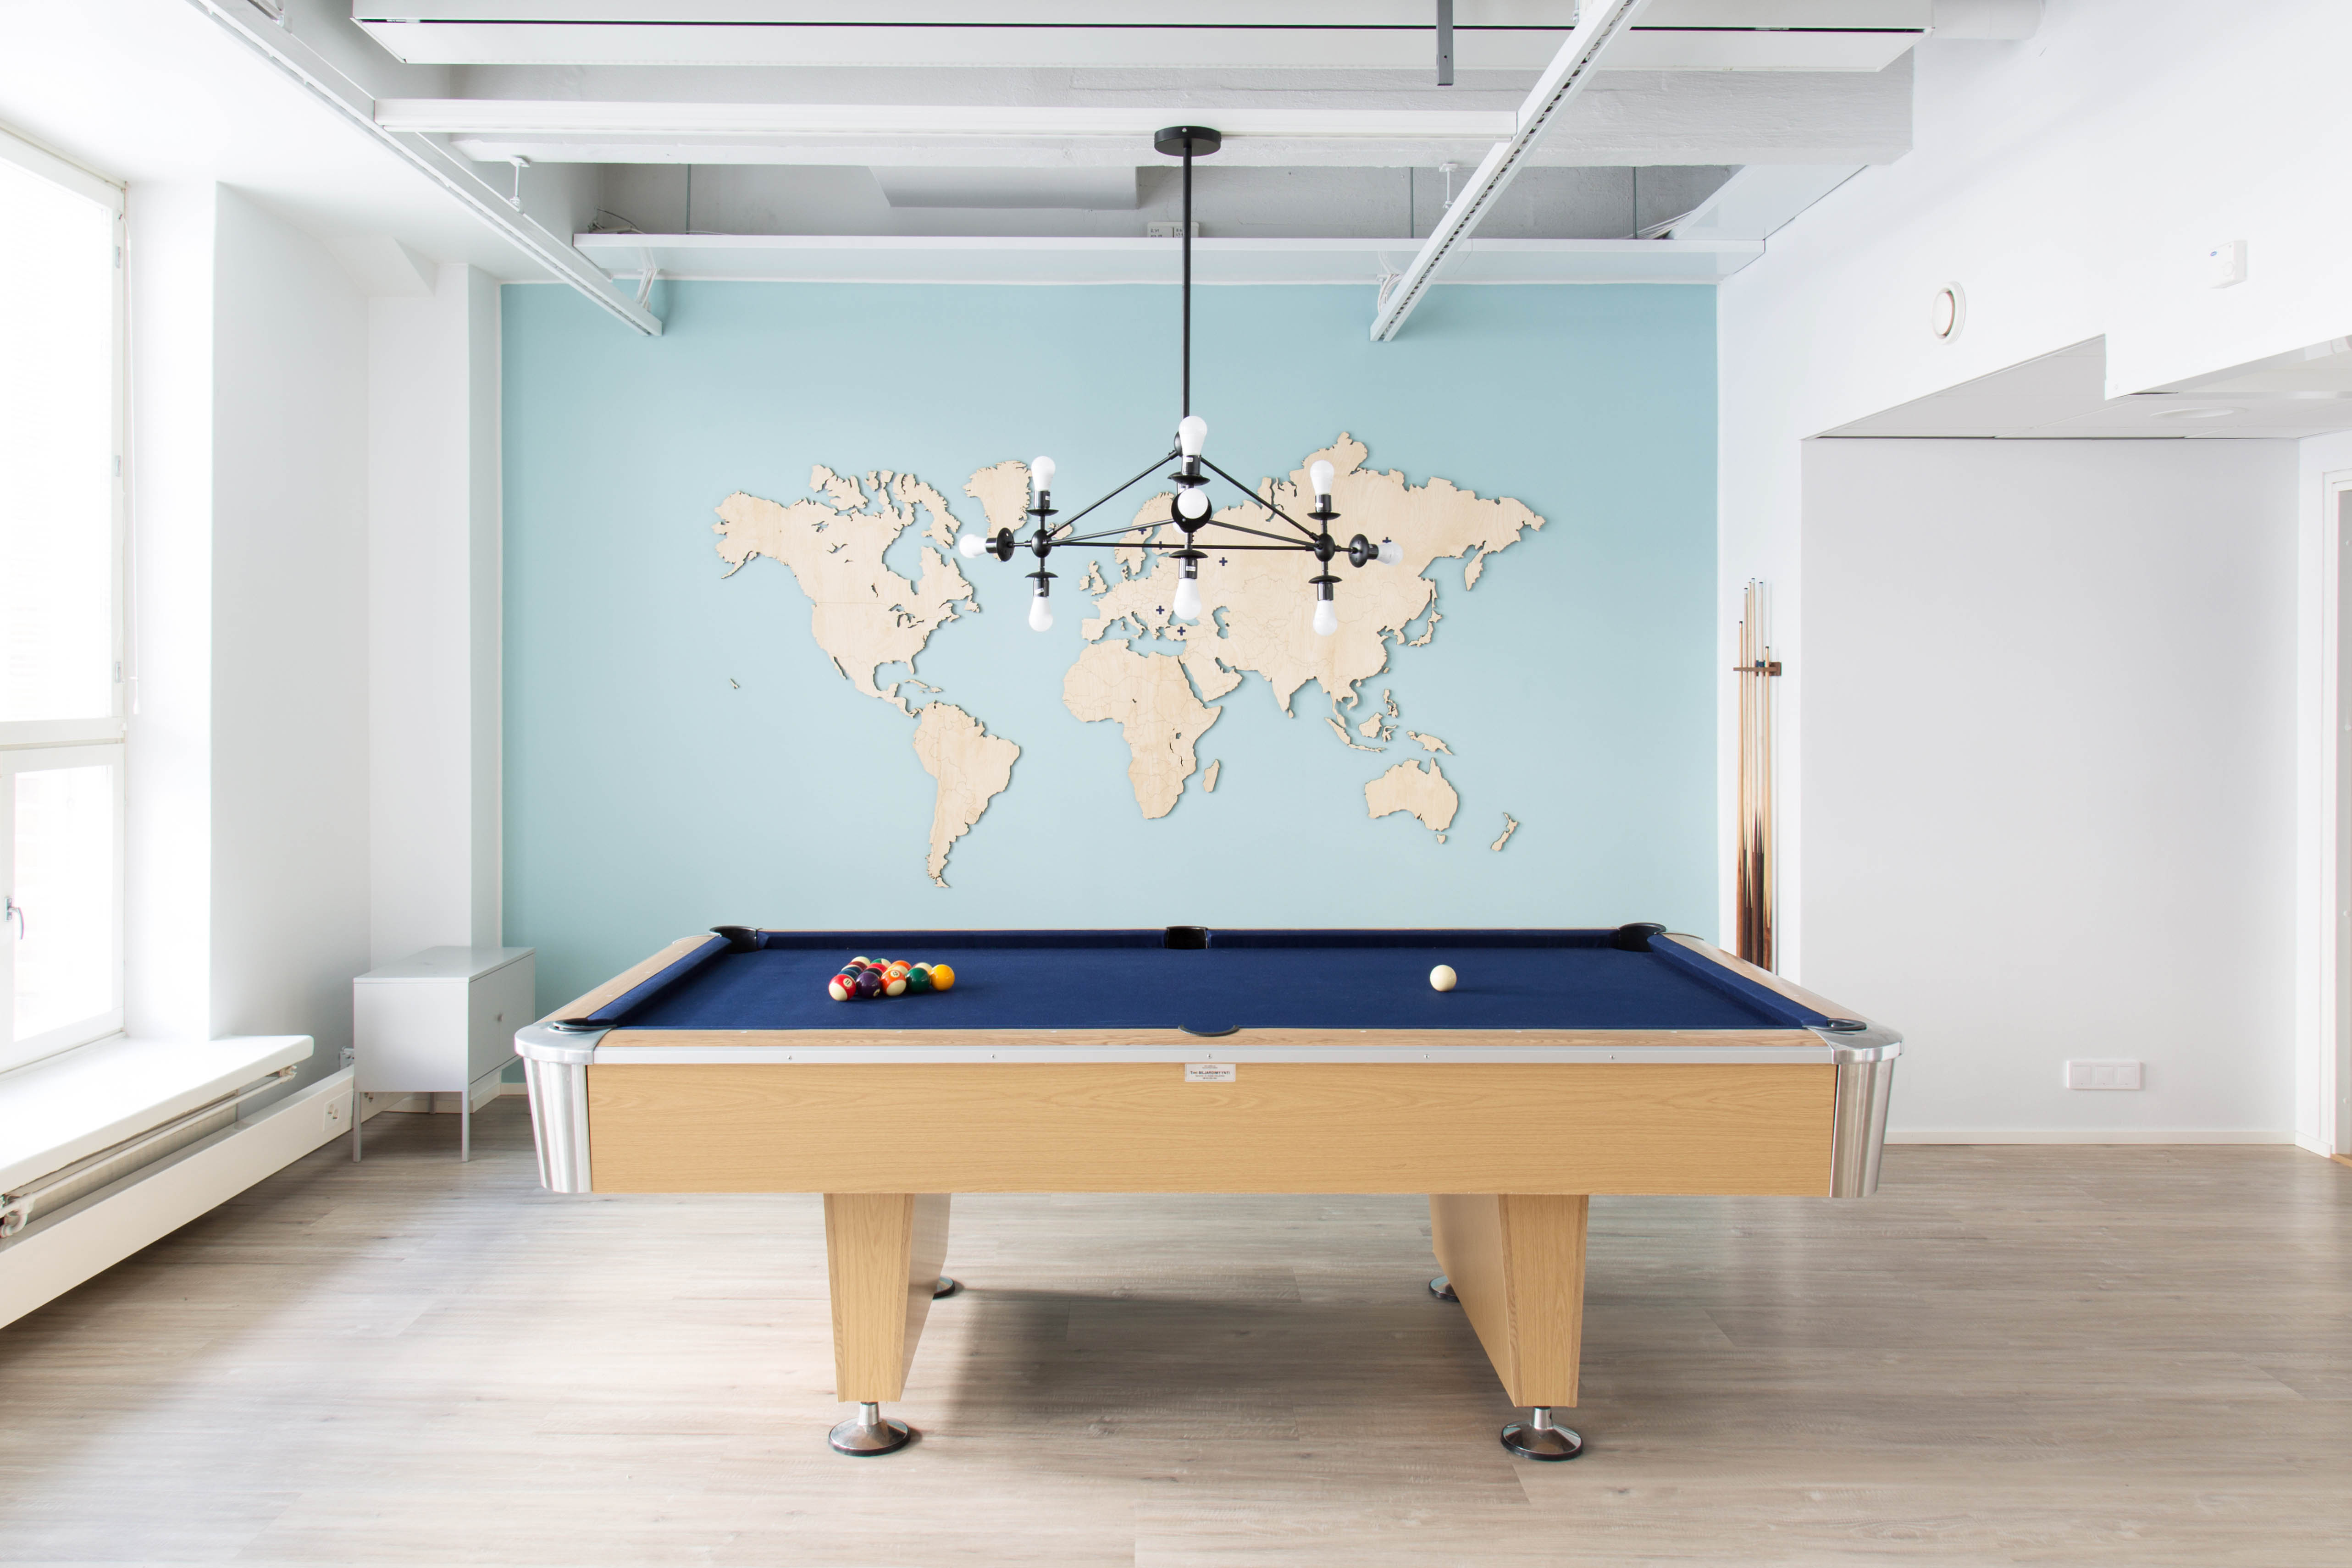 Bonusway office pool table and map